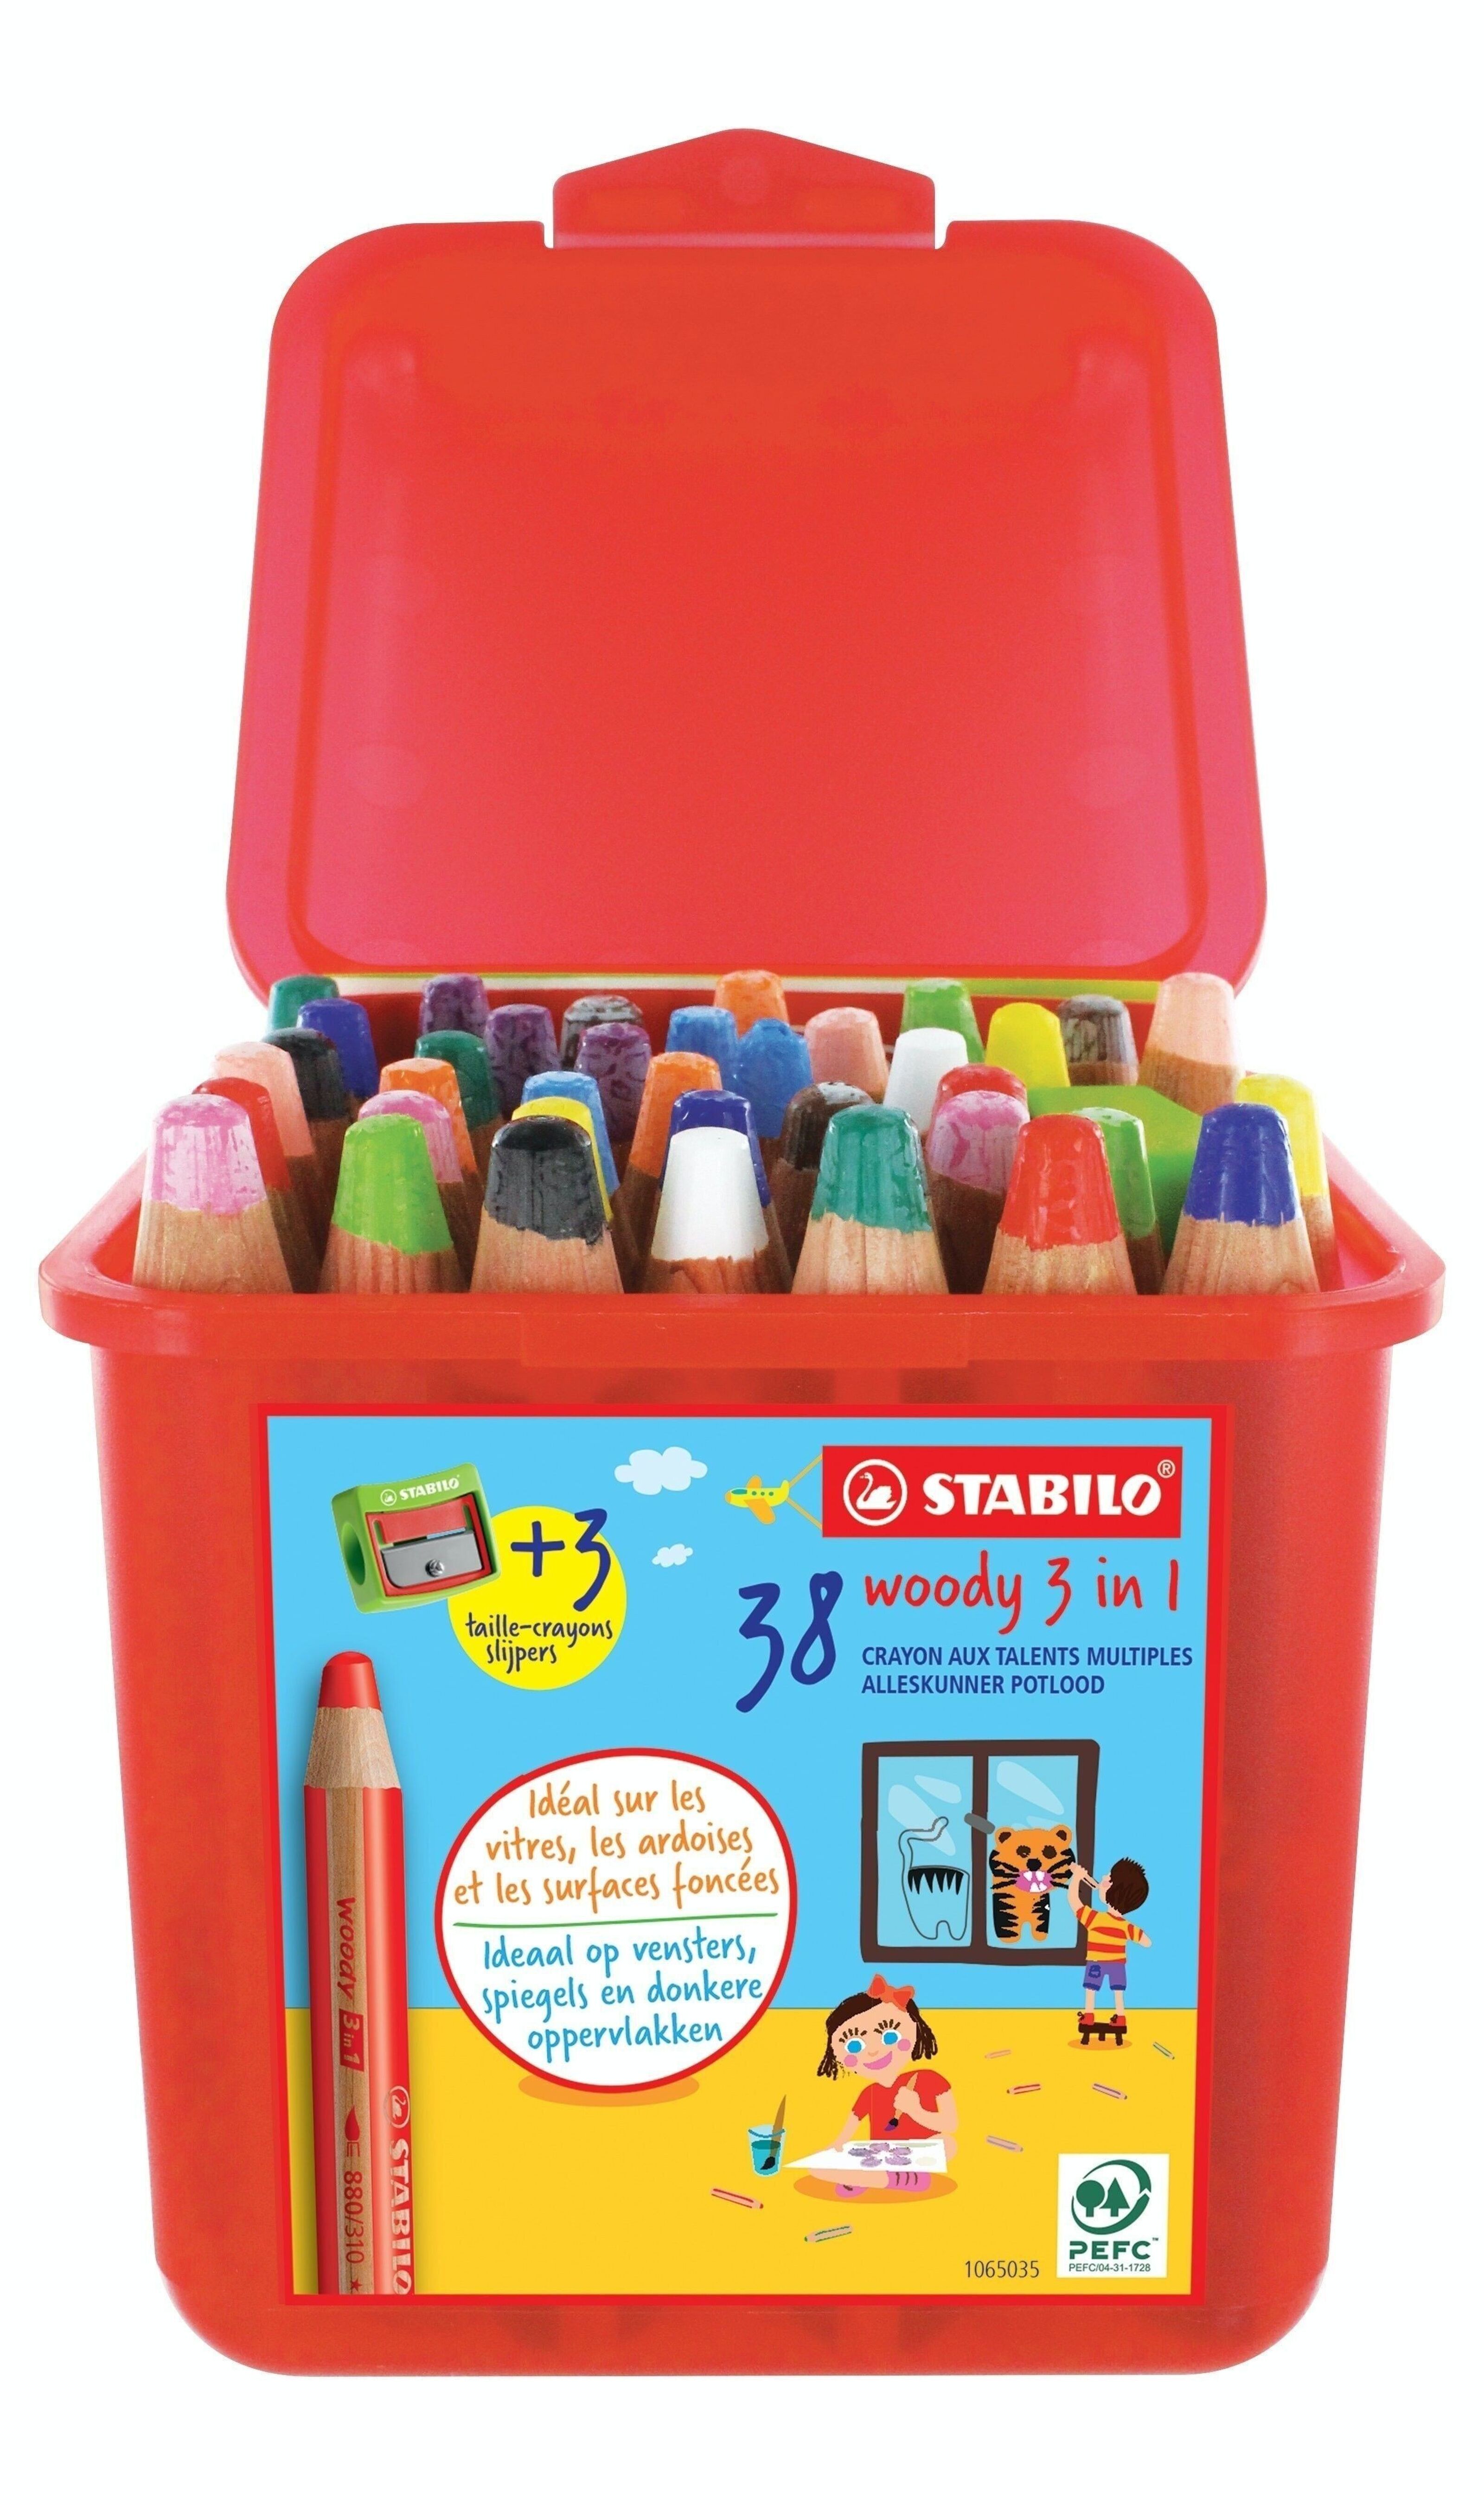 Stabilo Woody 3 in 1 Maxy Crayon - Case of 6, Sharpener Included unisex  (bambini)